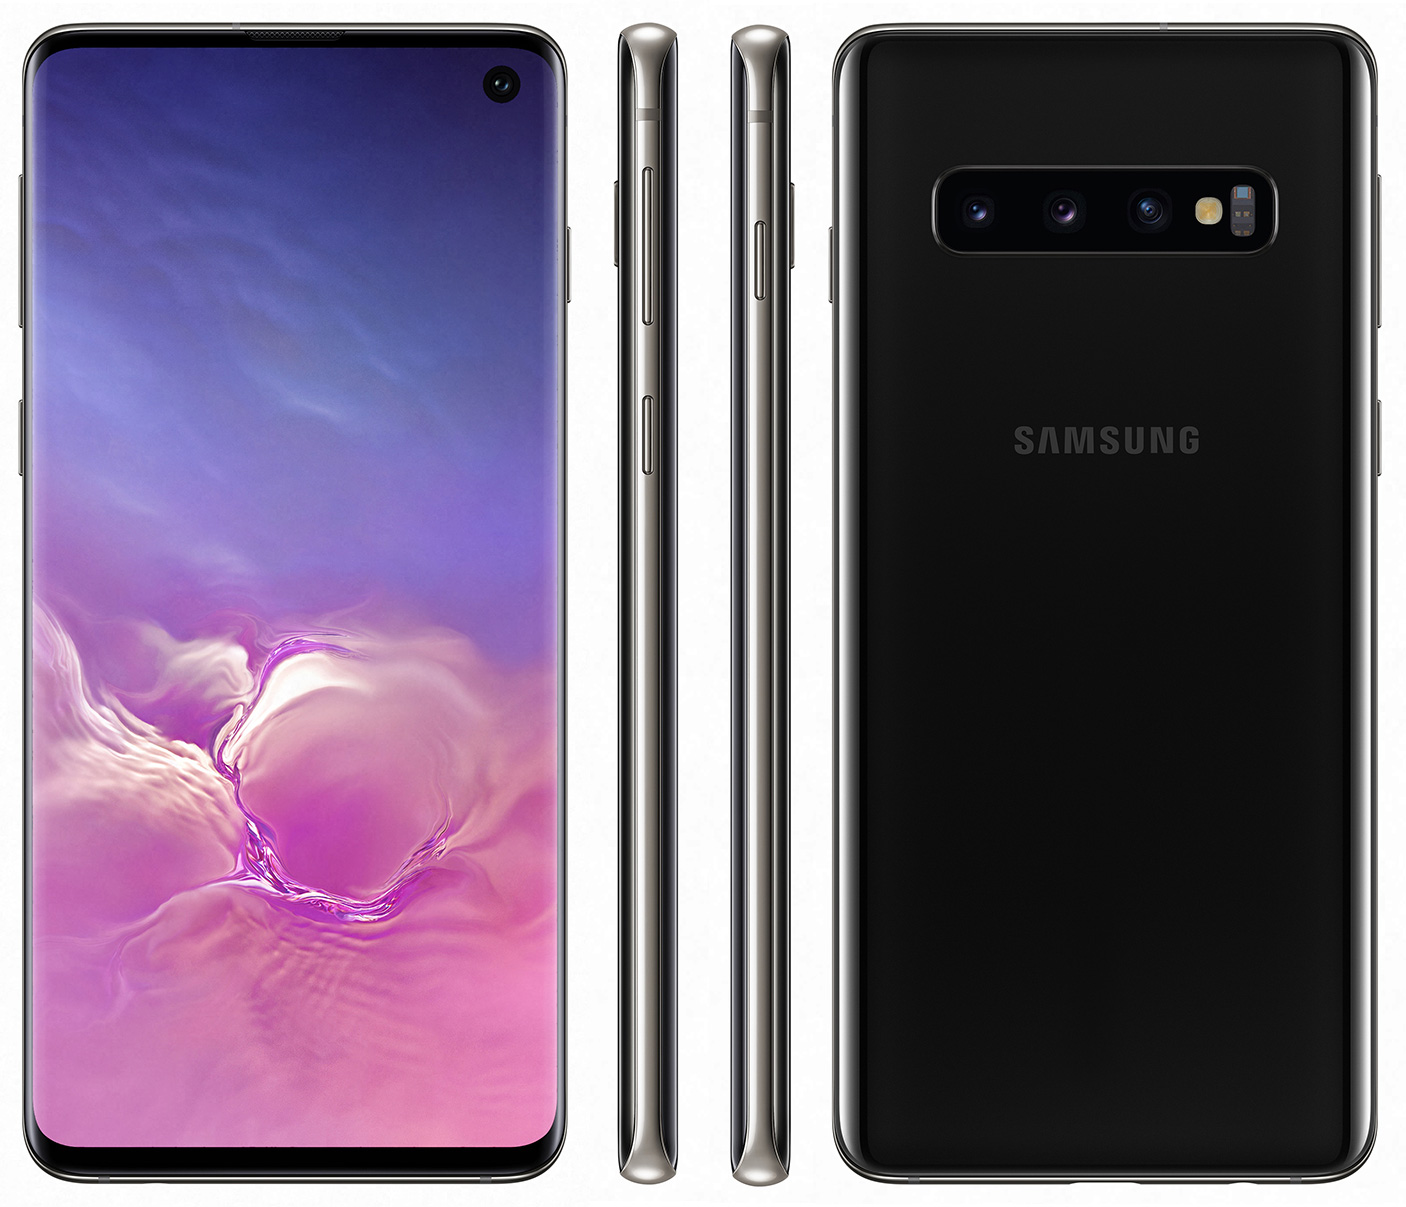 Kolonisten vrijwilliger nul Samsung Galaxy S10, S10+, and S10e official, special 5G version of the S10  also confirmed - TmoNews